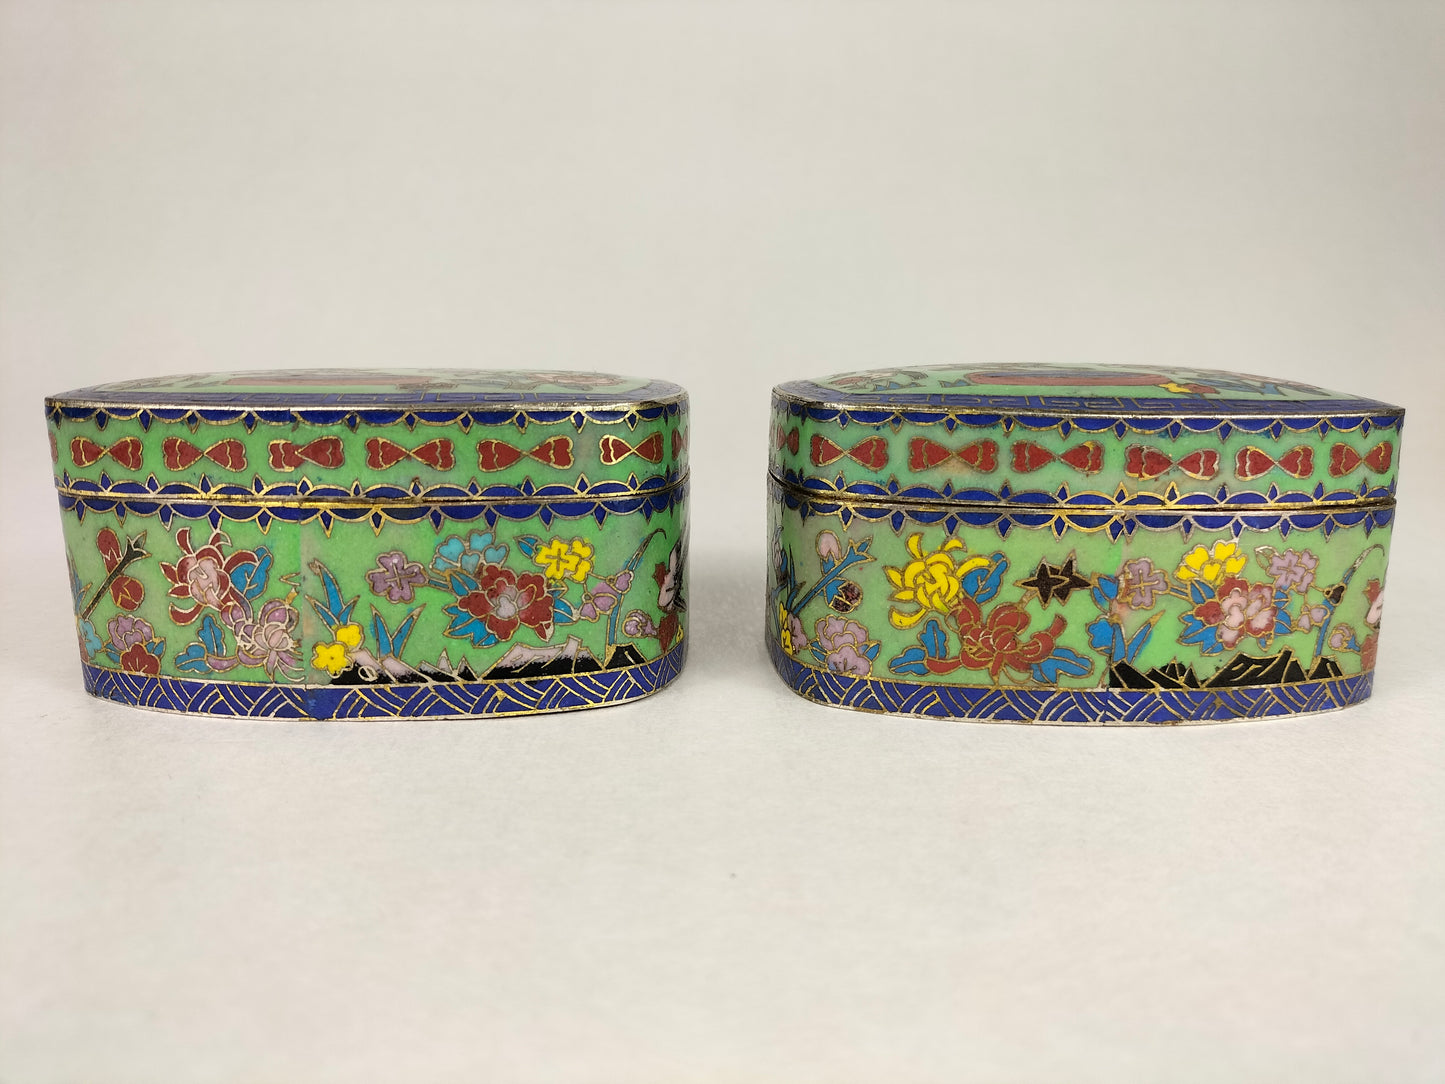 Pair of Chinese cloisonne lidded boxes decorated with dogs and floral motifs // Republic Period (1912-1949)